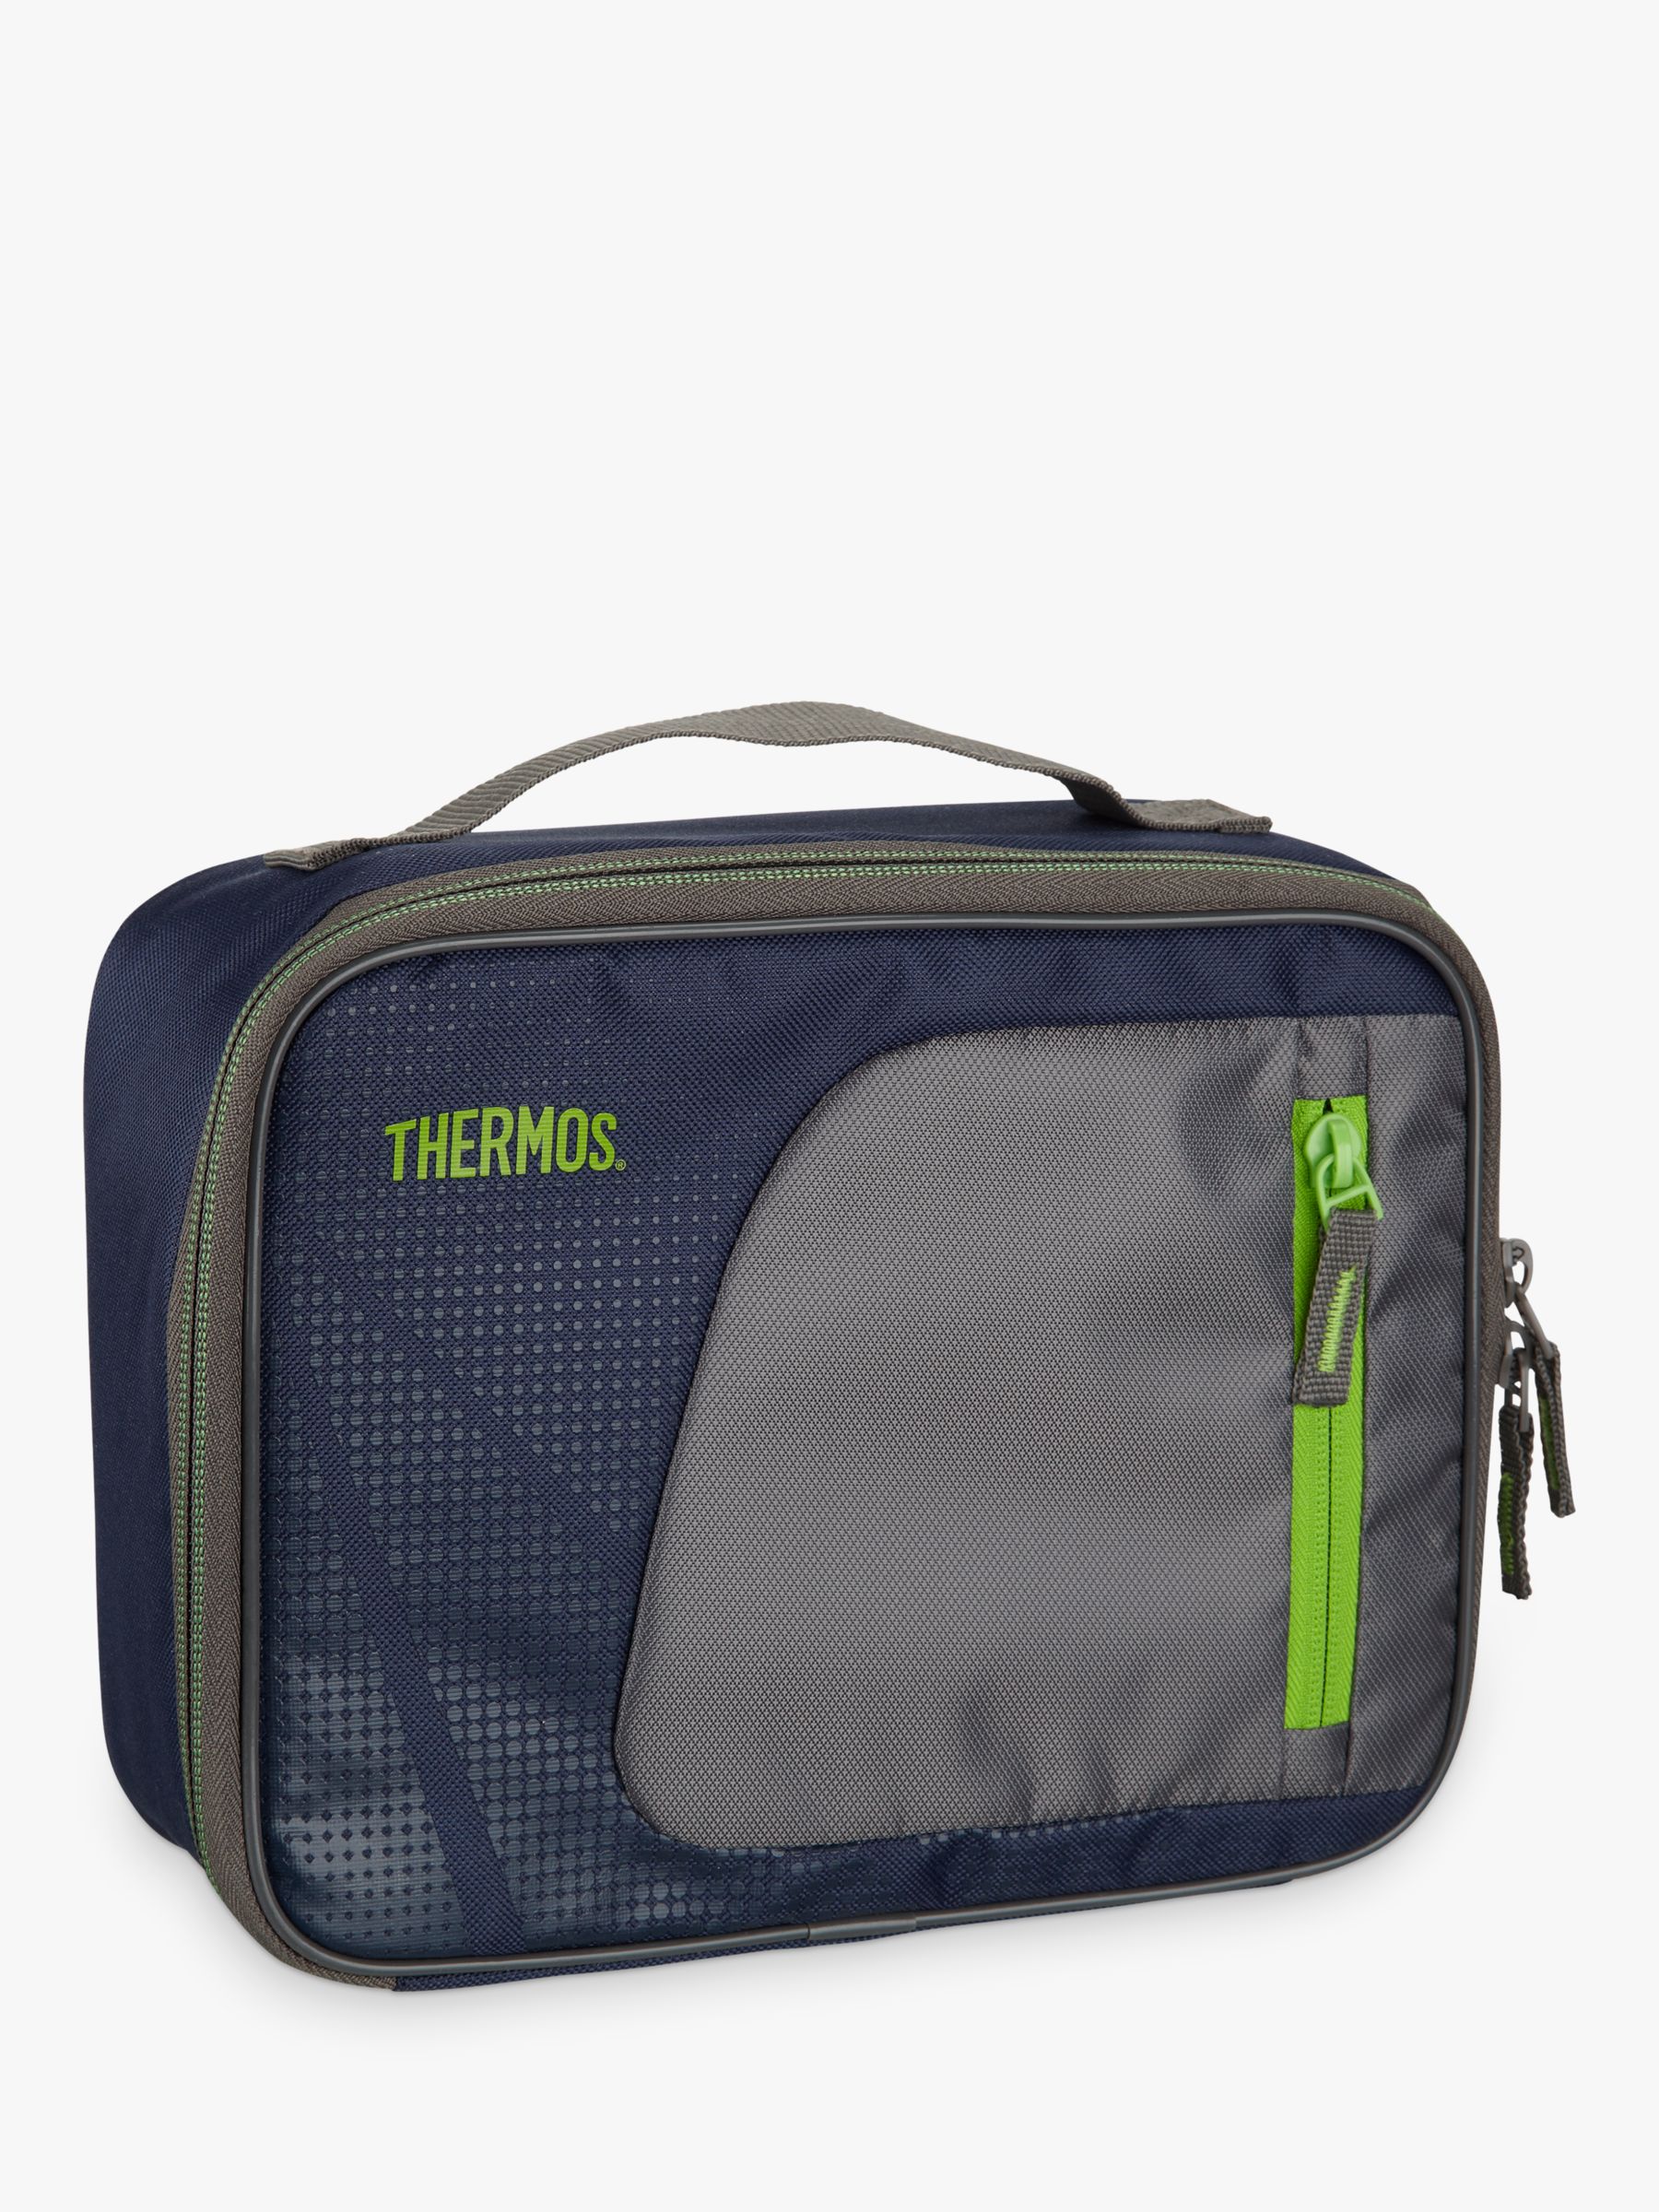 Thermos Lunch Bag | Blue at John Lewis 